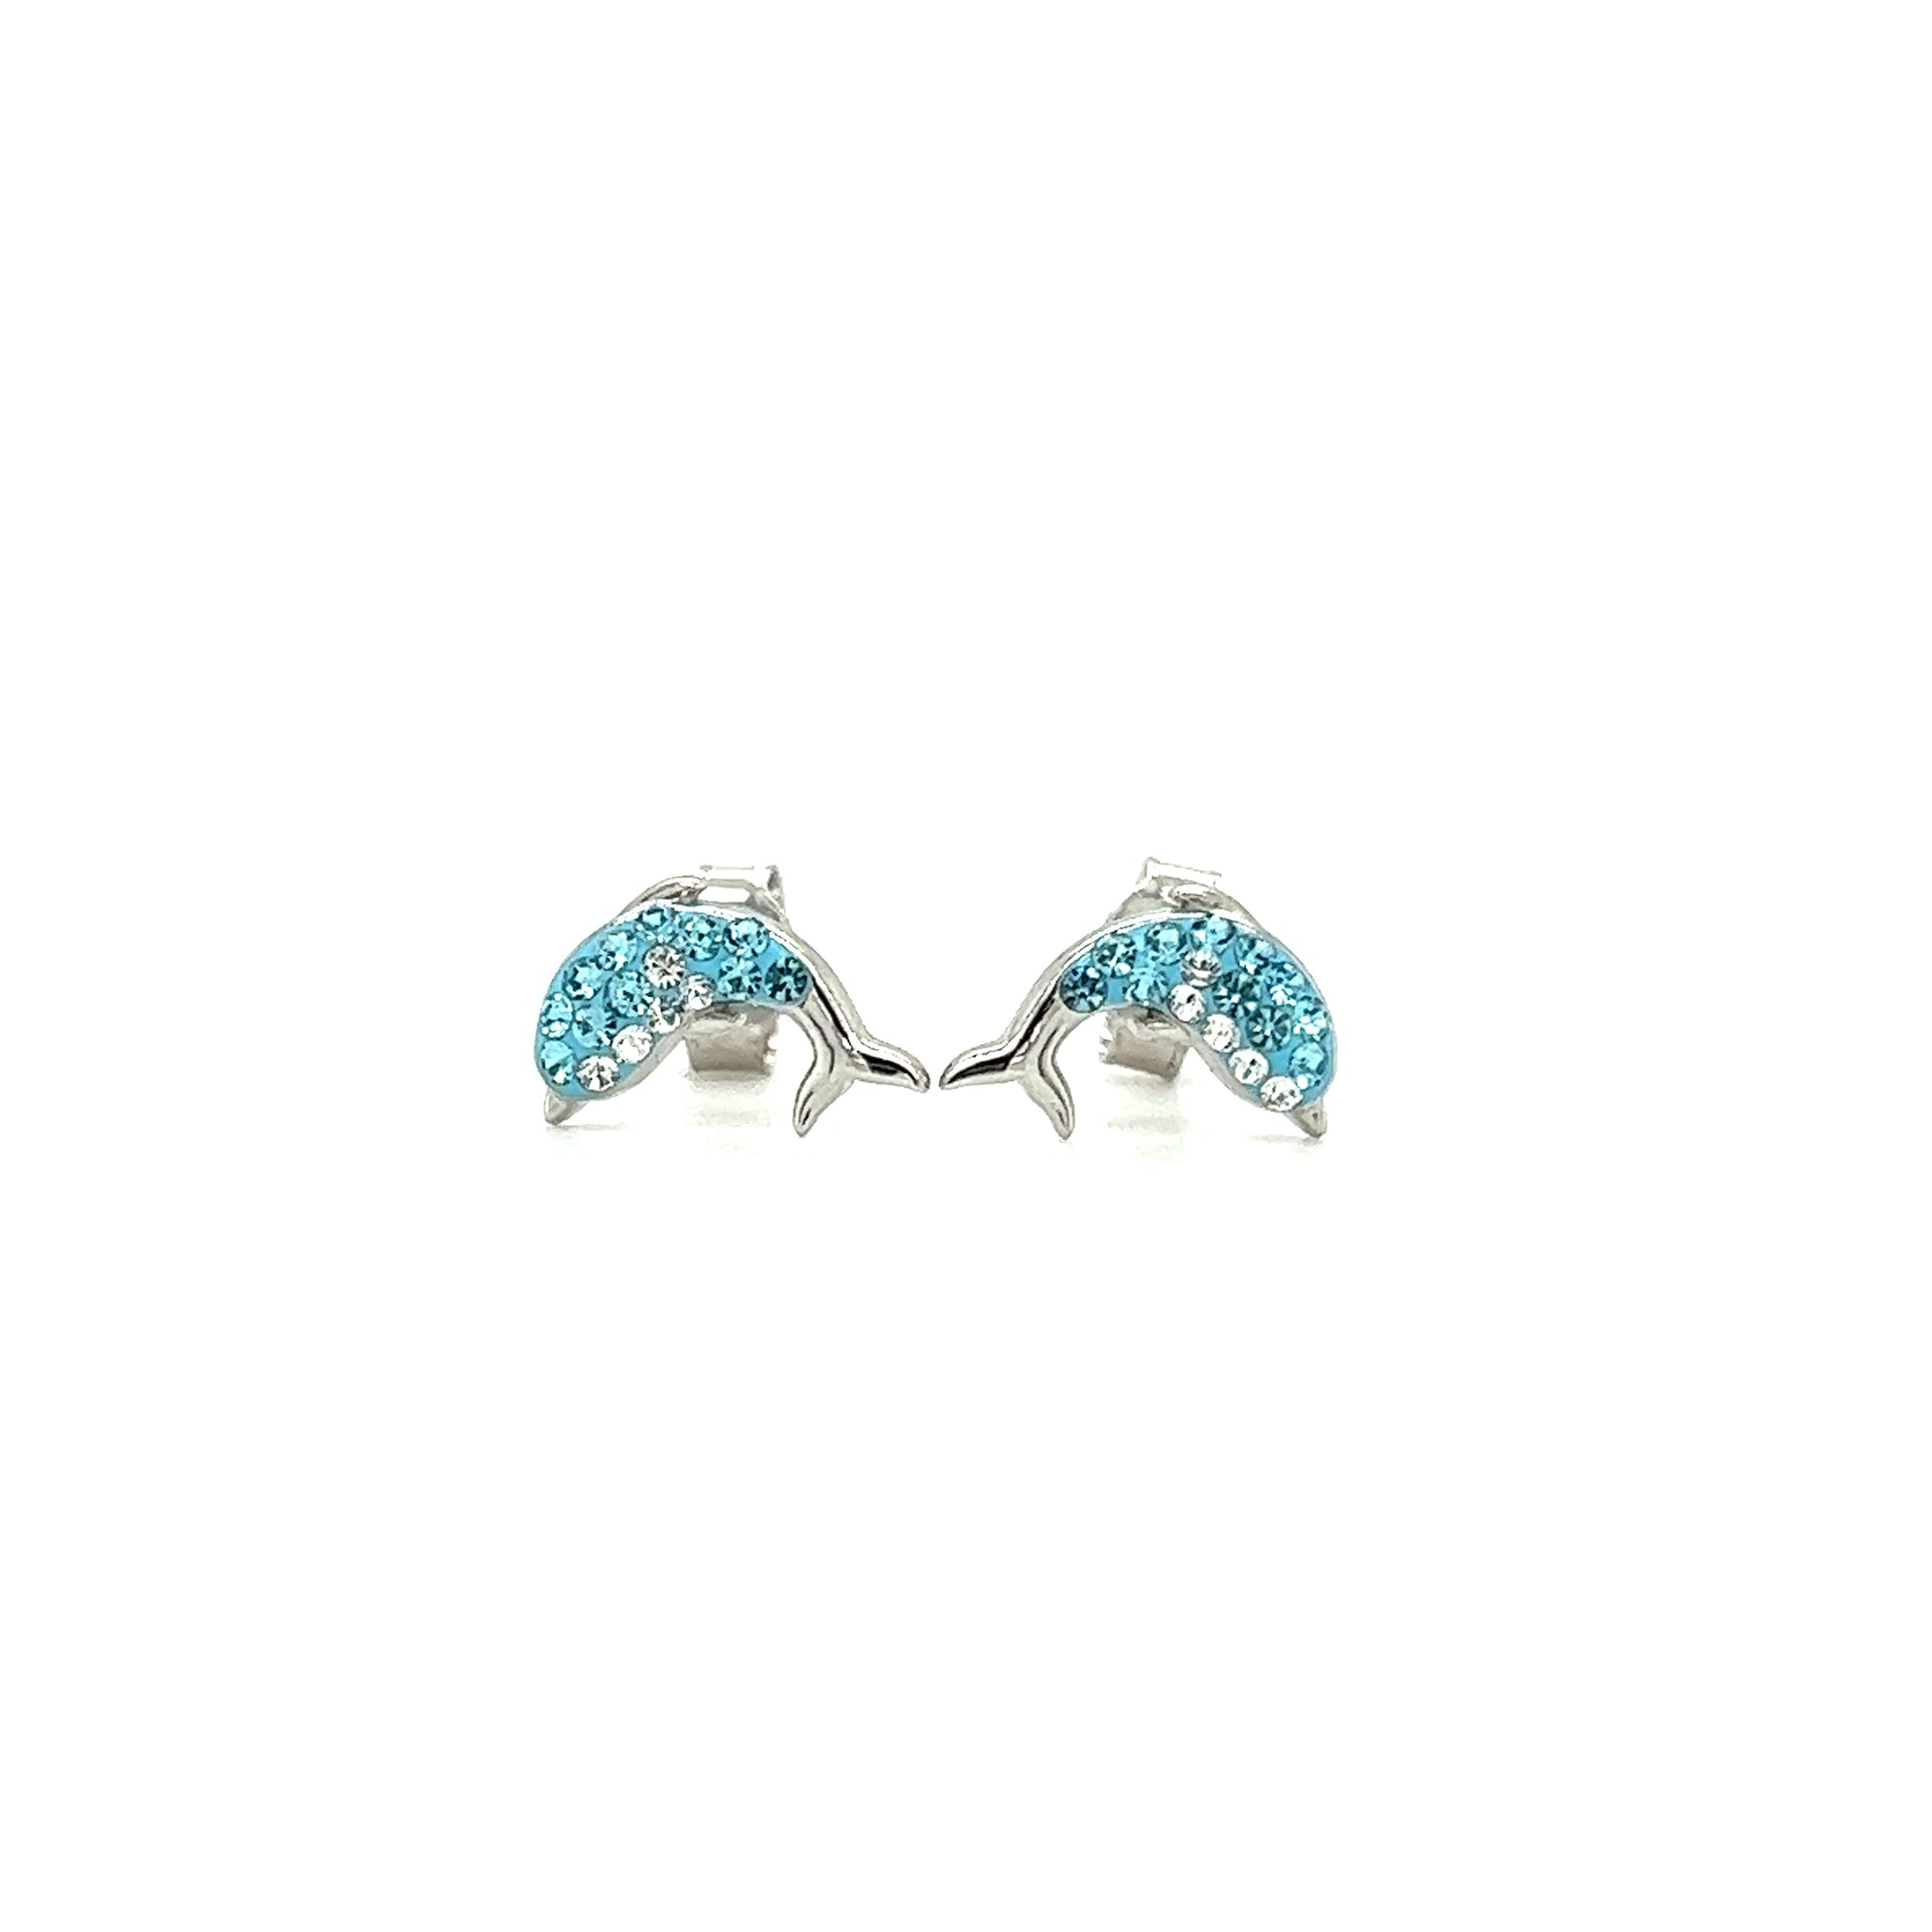 Dolphin Stud Earrings with Aqua and White Crystals in Sterling Silver Front View